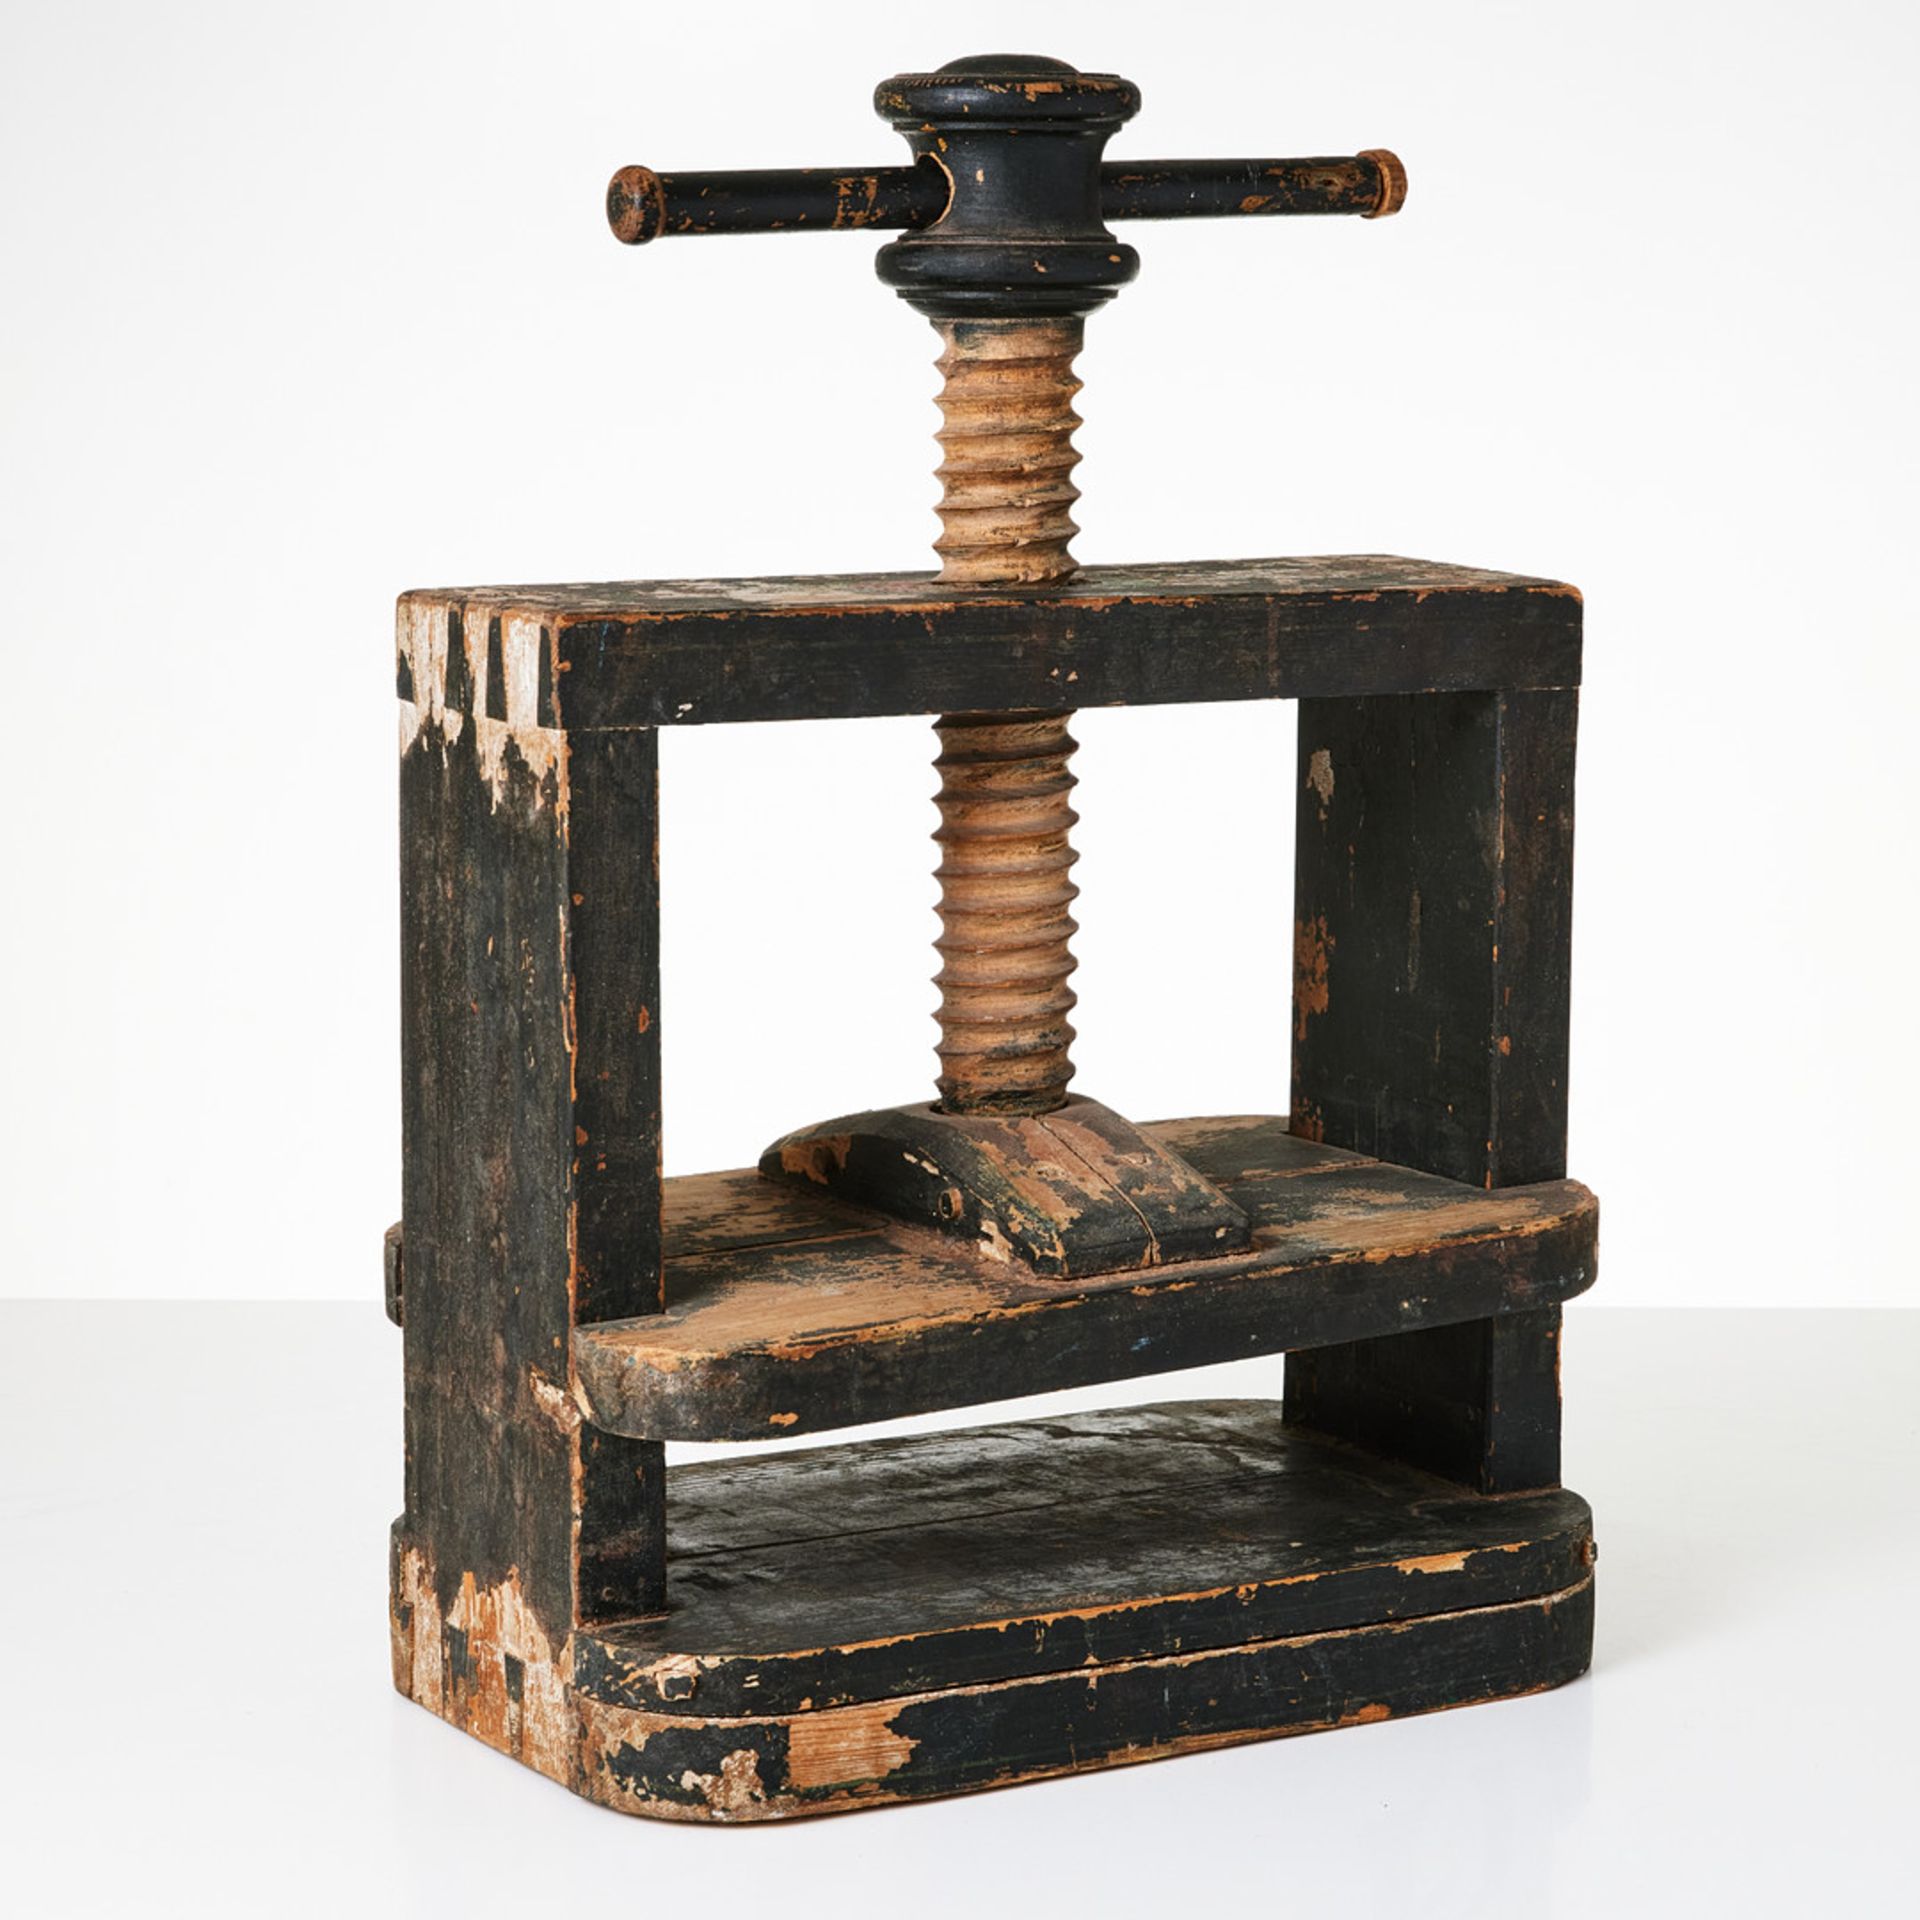 A 19TH CENTURY SWEDISH PAINTED WOOD HERB PRESS - Image 2 of 3